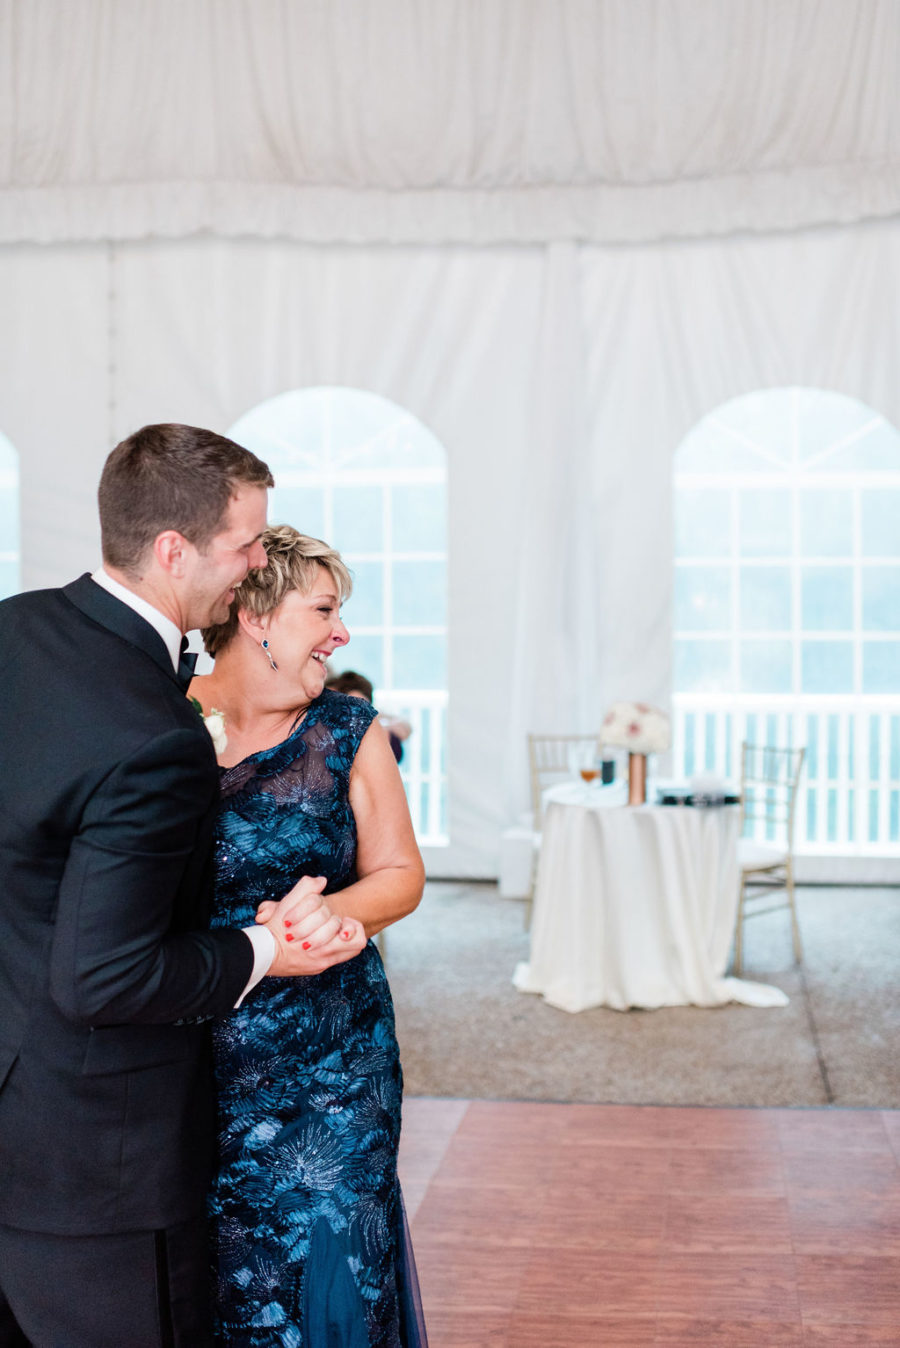 Mother/son dance for Nashville Wedding captured by Maria Gloer Photography